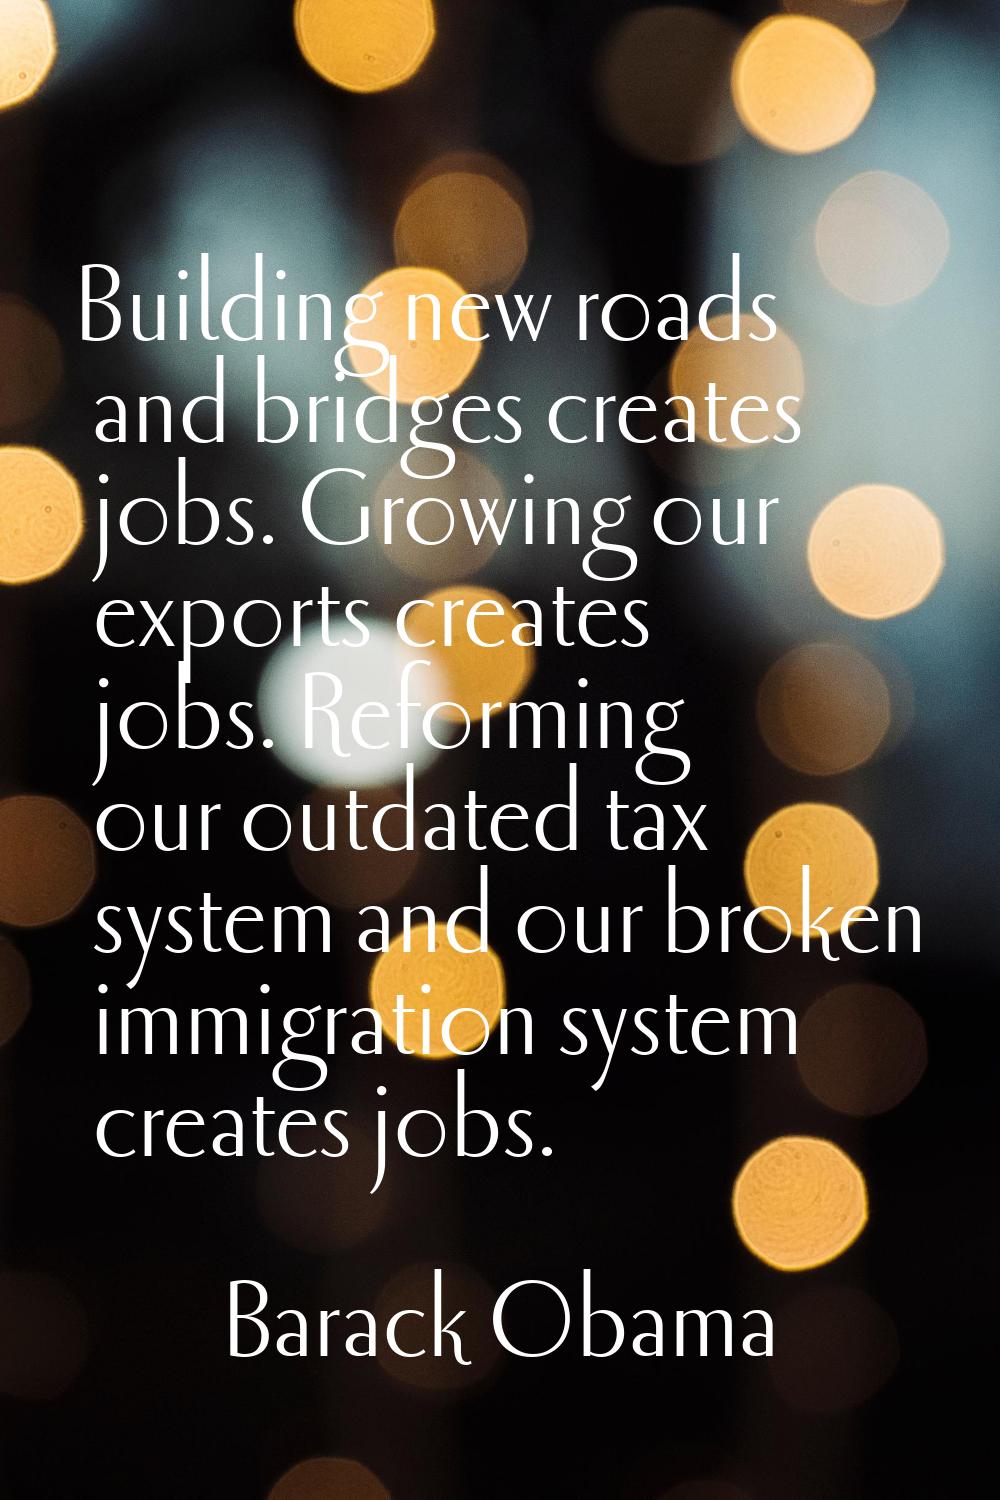 Building new roads and bridges creates jobs. Growing our exports creates jobs. Reforming our outdat